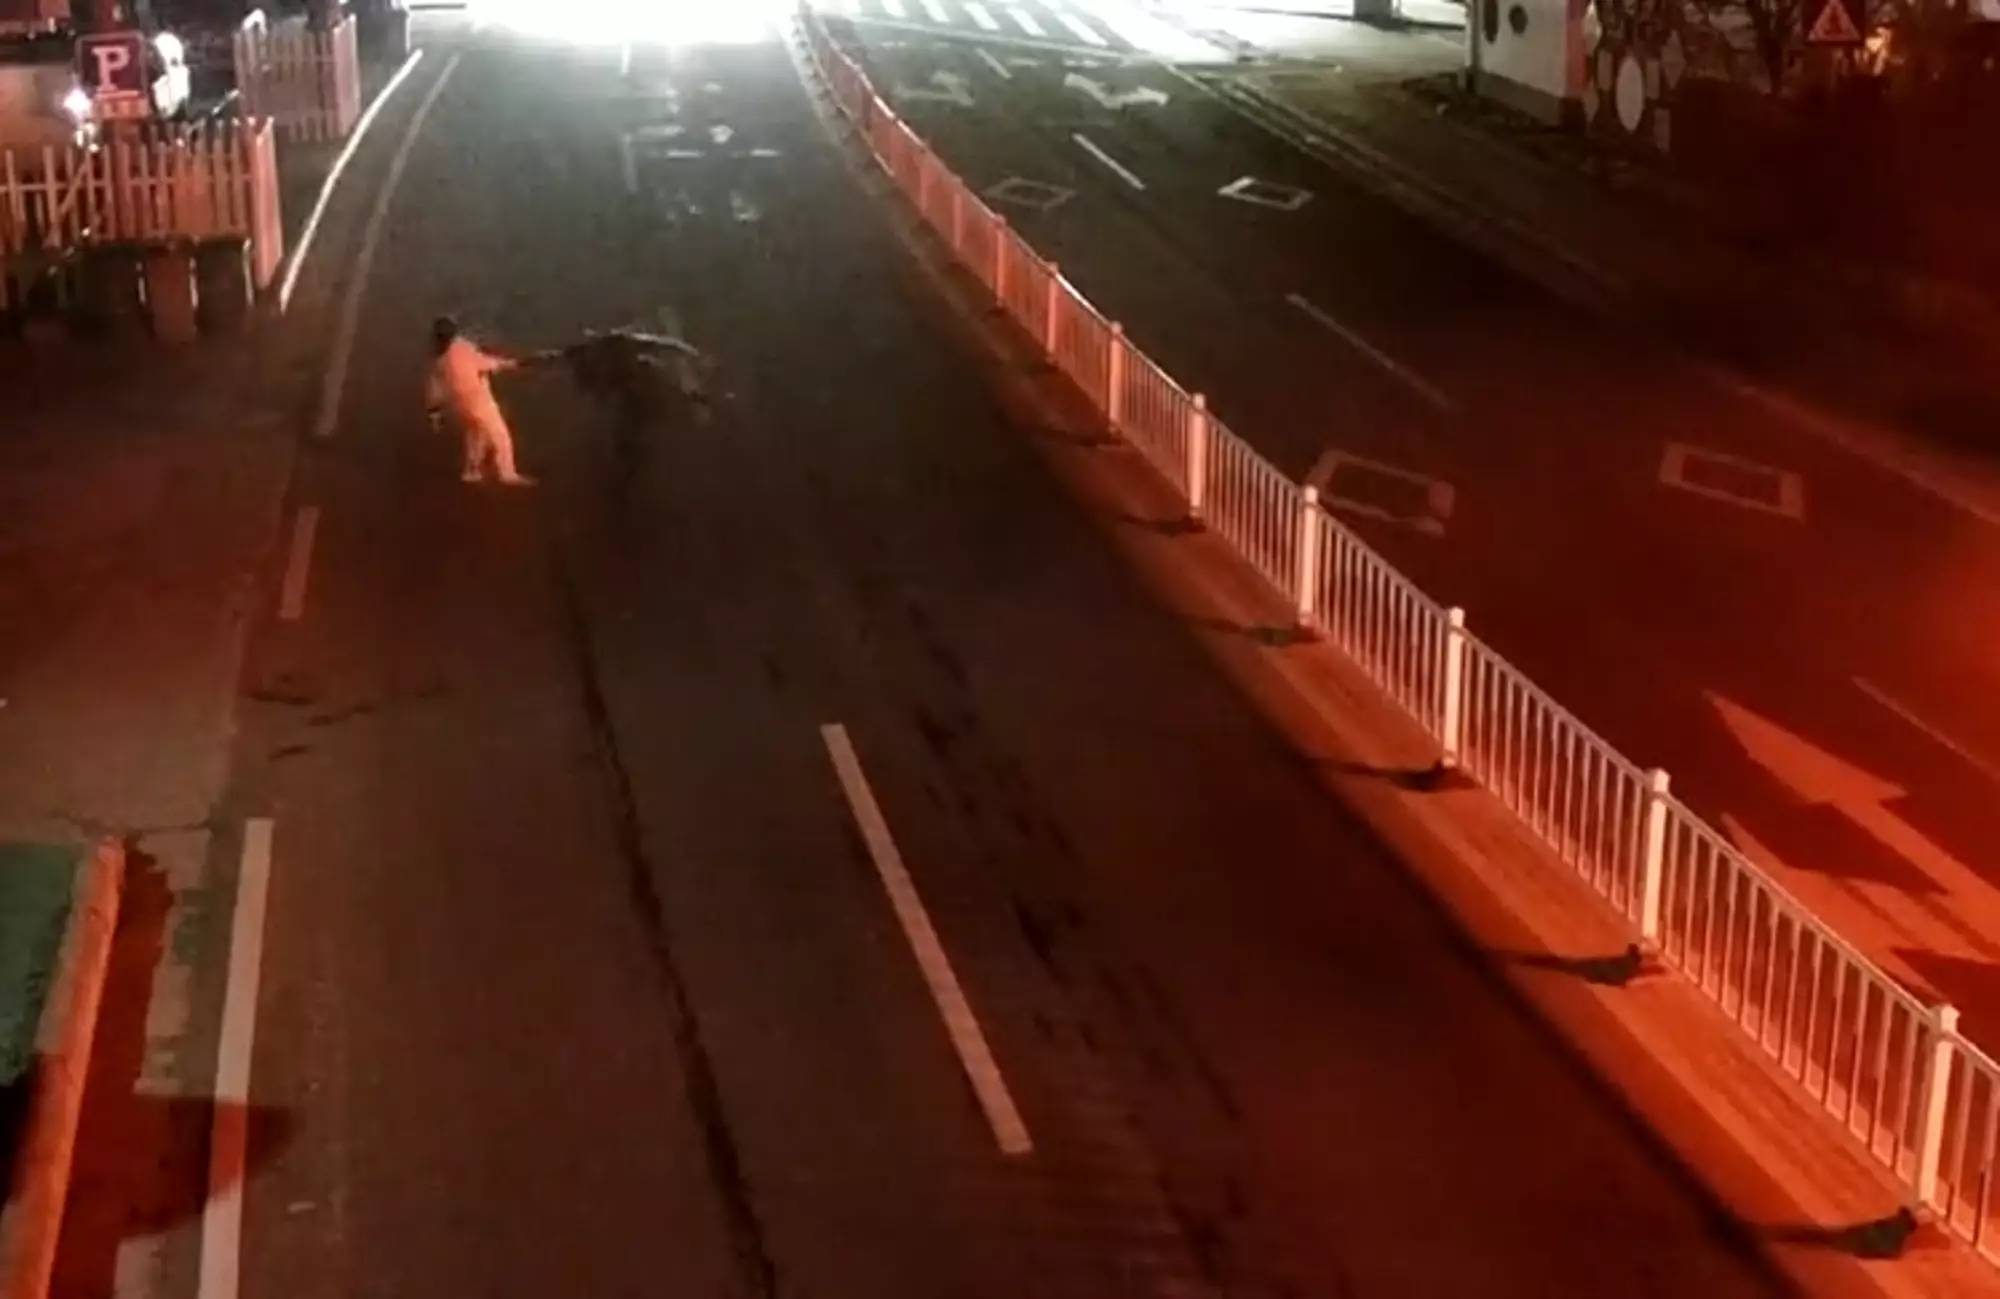 The man and the woman fighting in the middle of the road.